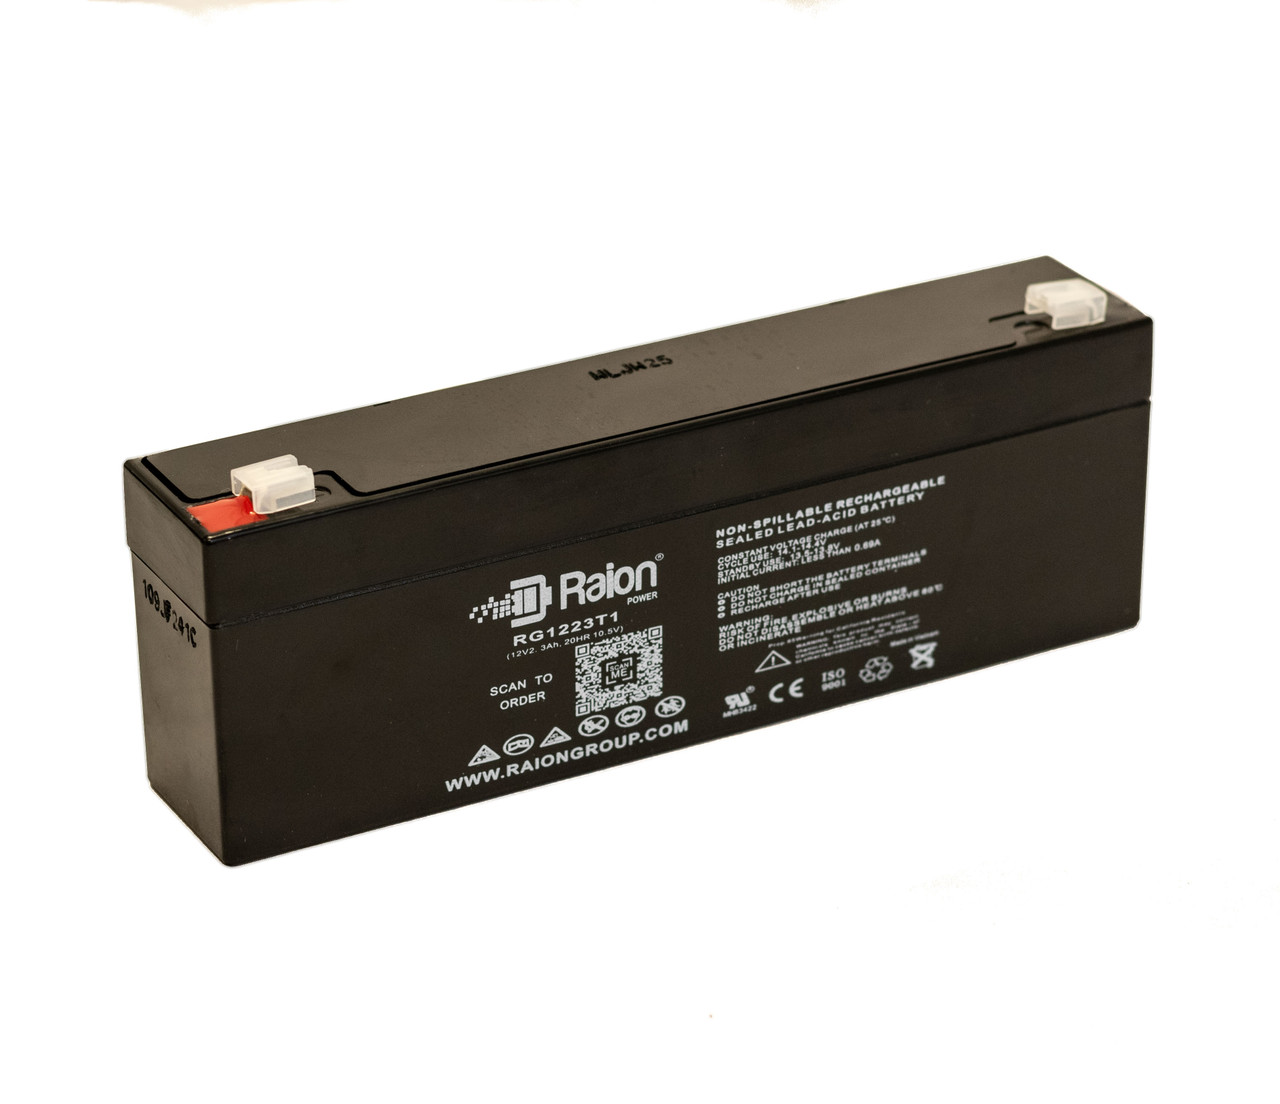 Raion Power RG1223T1 12V 2.3Ah Replacement UPS Battery Cartridge for Intellipower ND PS1220 UPS